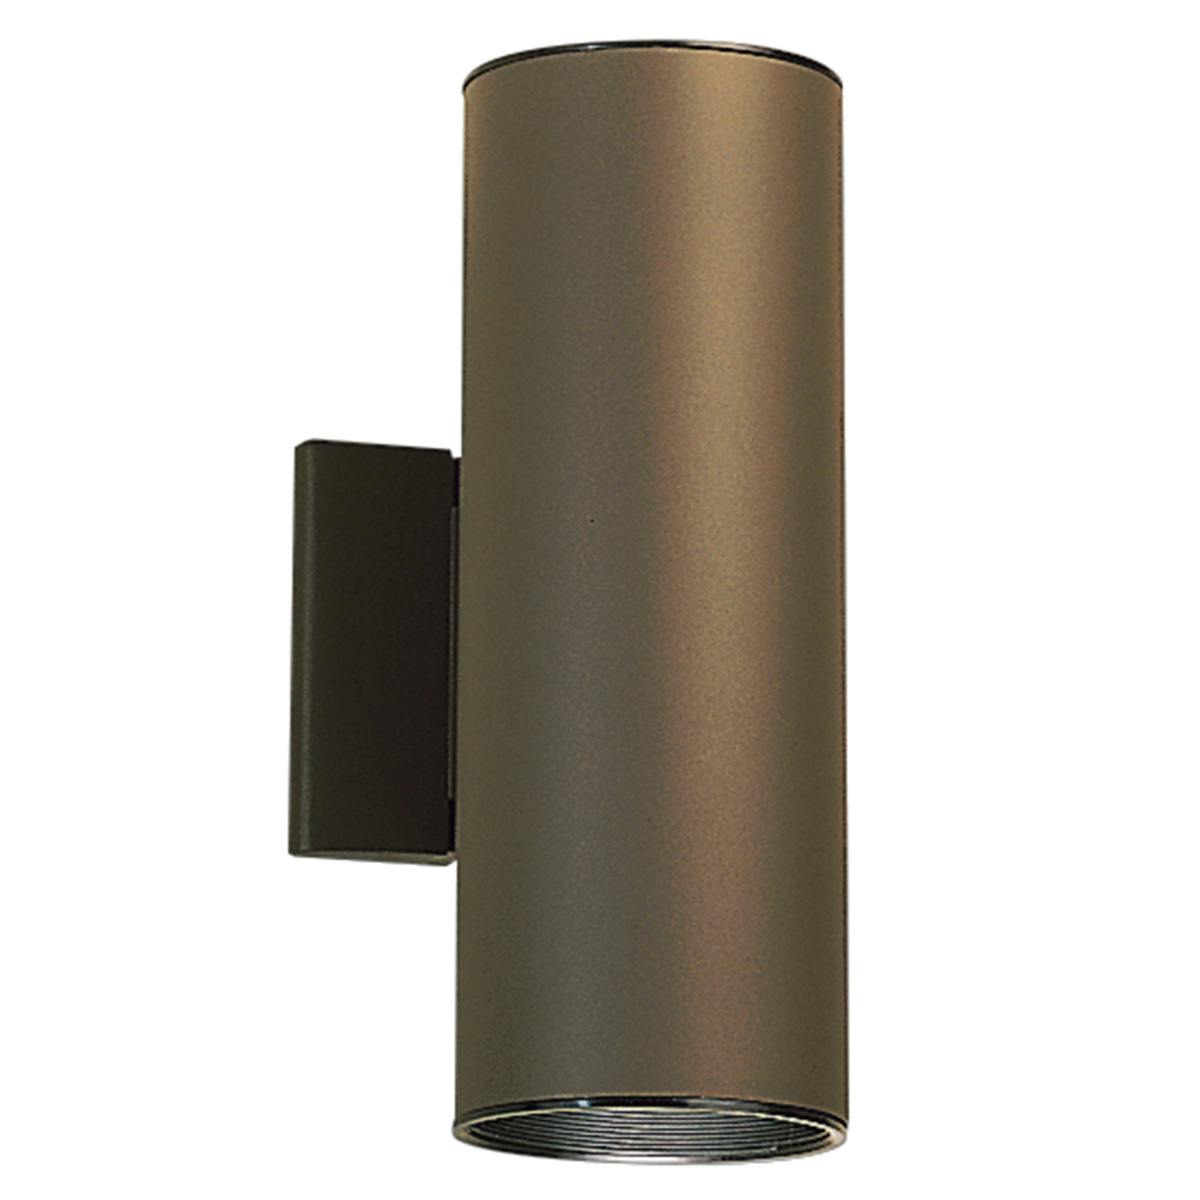 Cylinder 12" Wall Light in Bronze on a white background